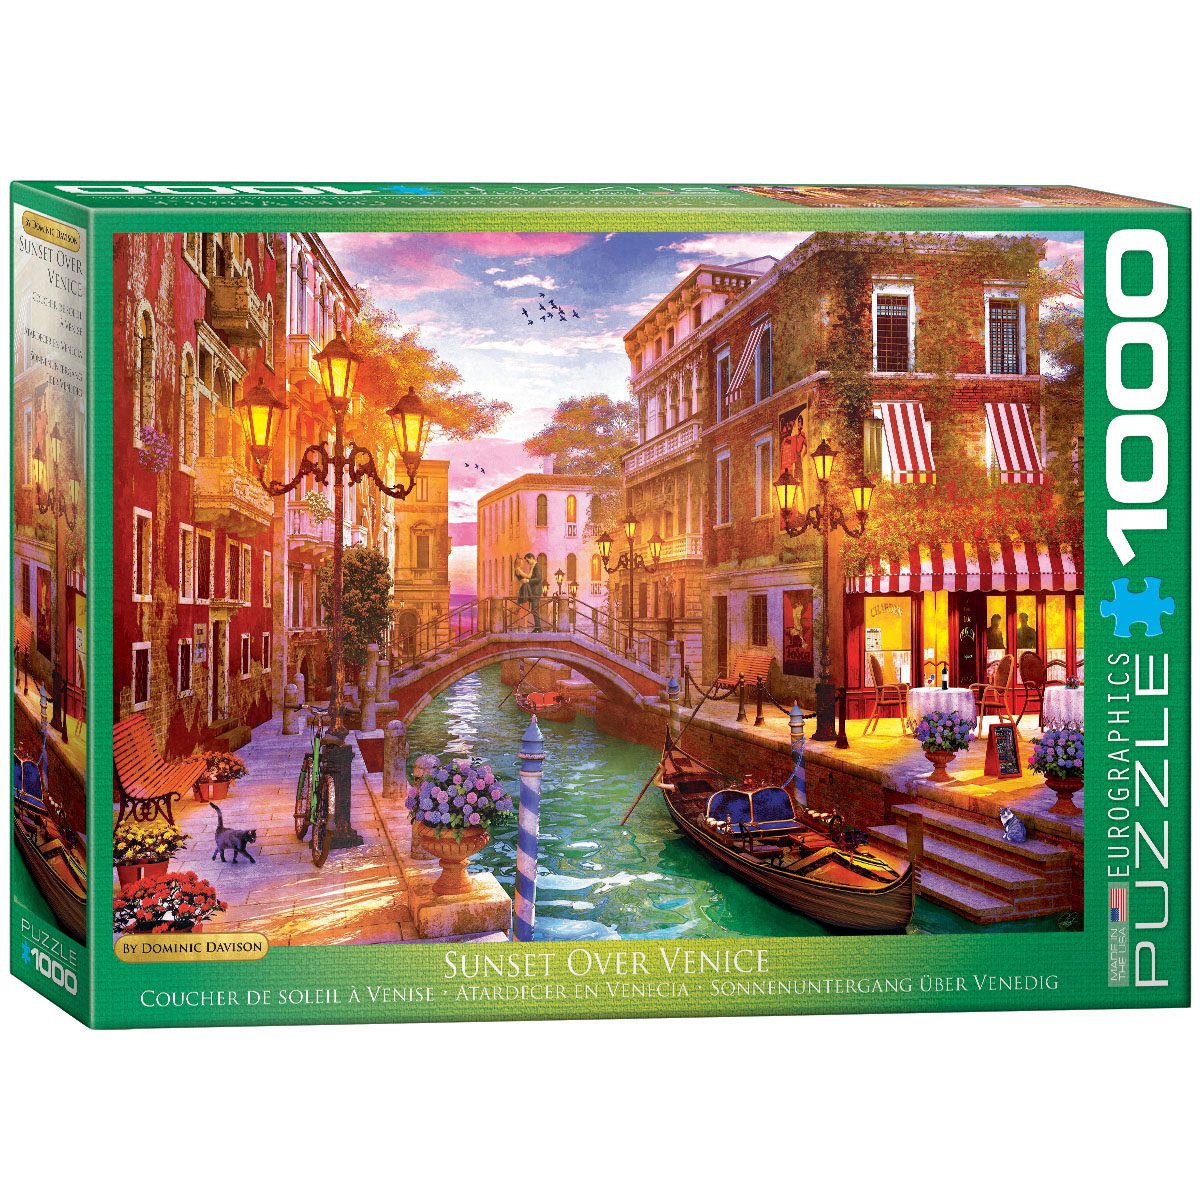 NEW Eurographics Jigsaw Puzzle 1000 Pieces Tiles "Venice" City Collection 